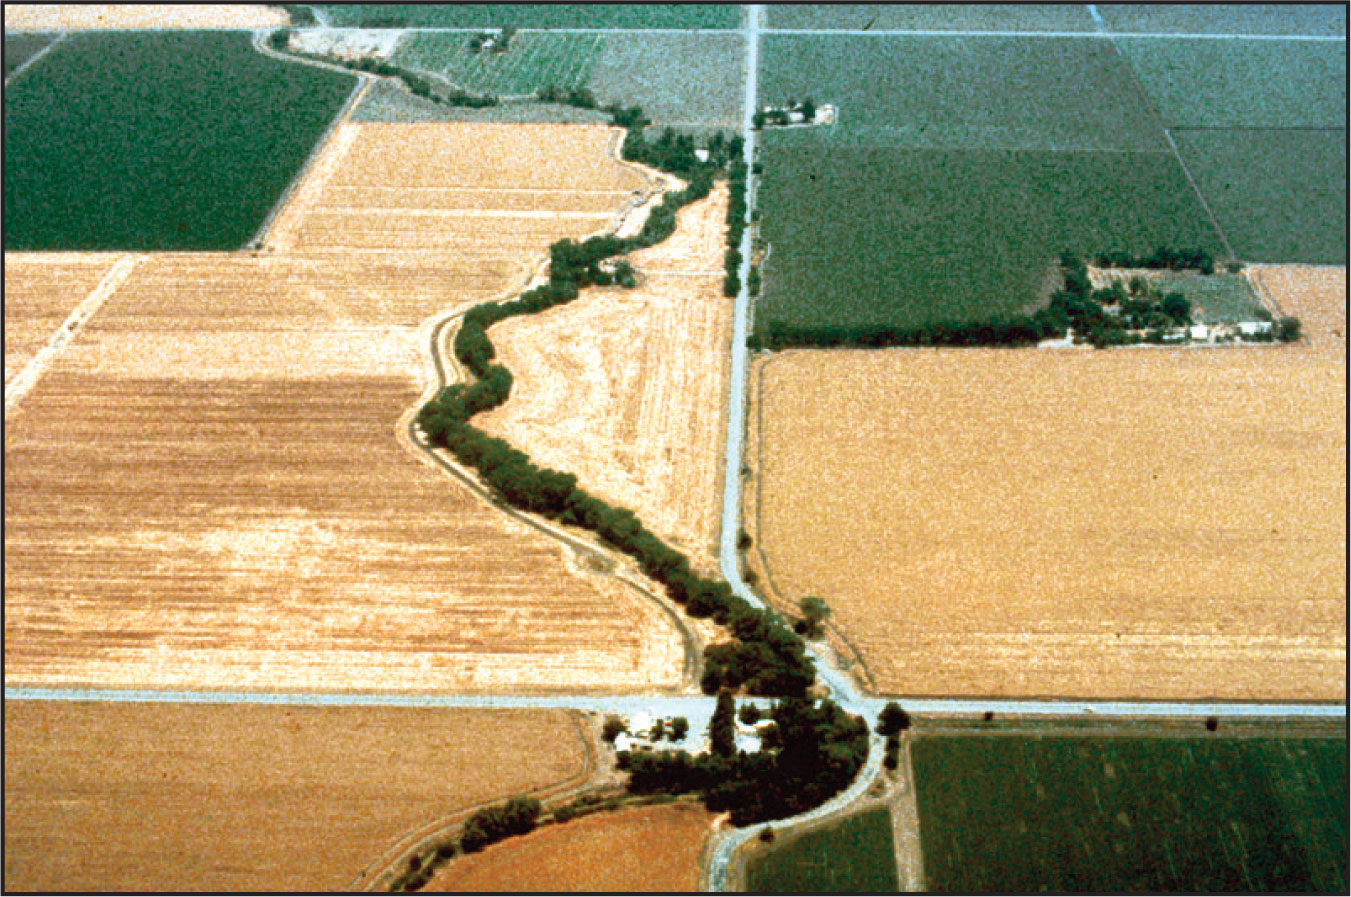 An aerial view of fielded areas to show typical Swainson's hawk habitats